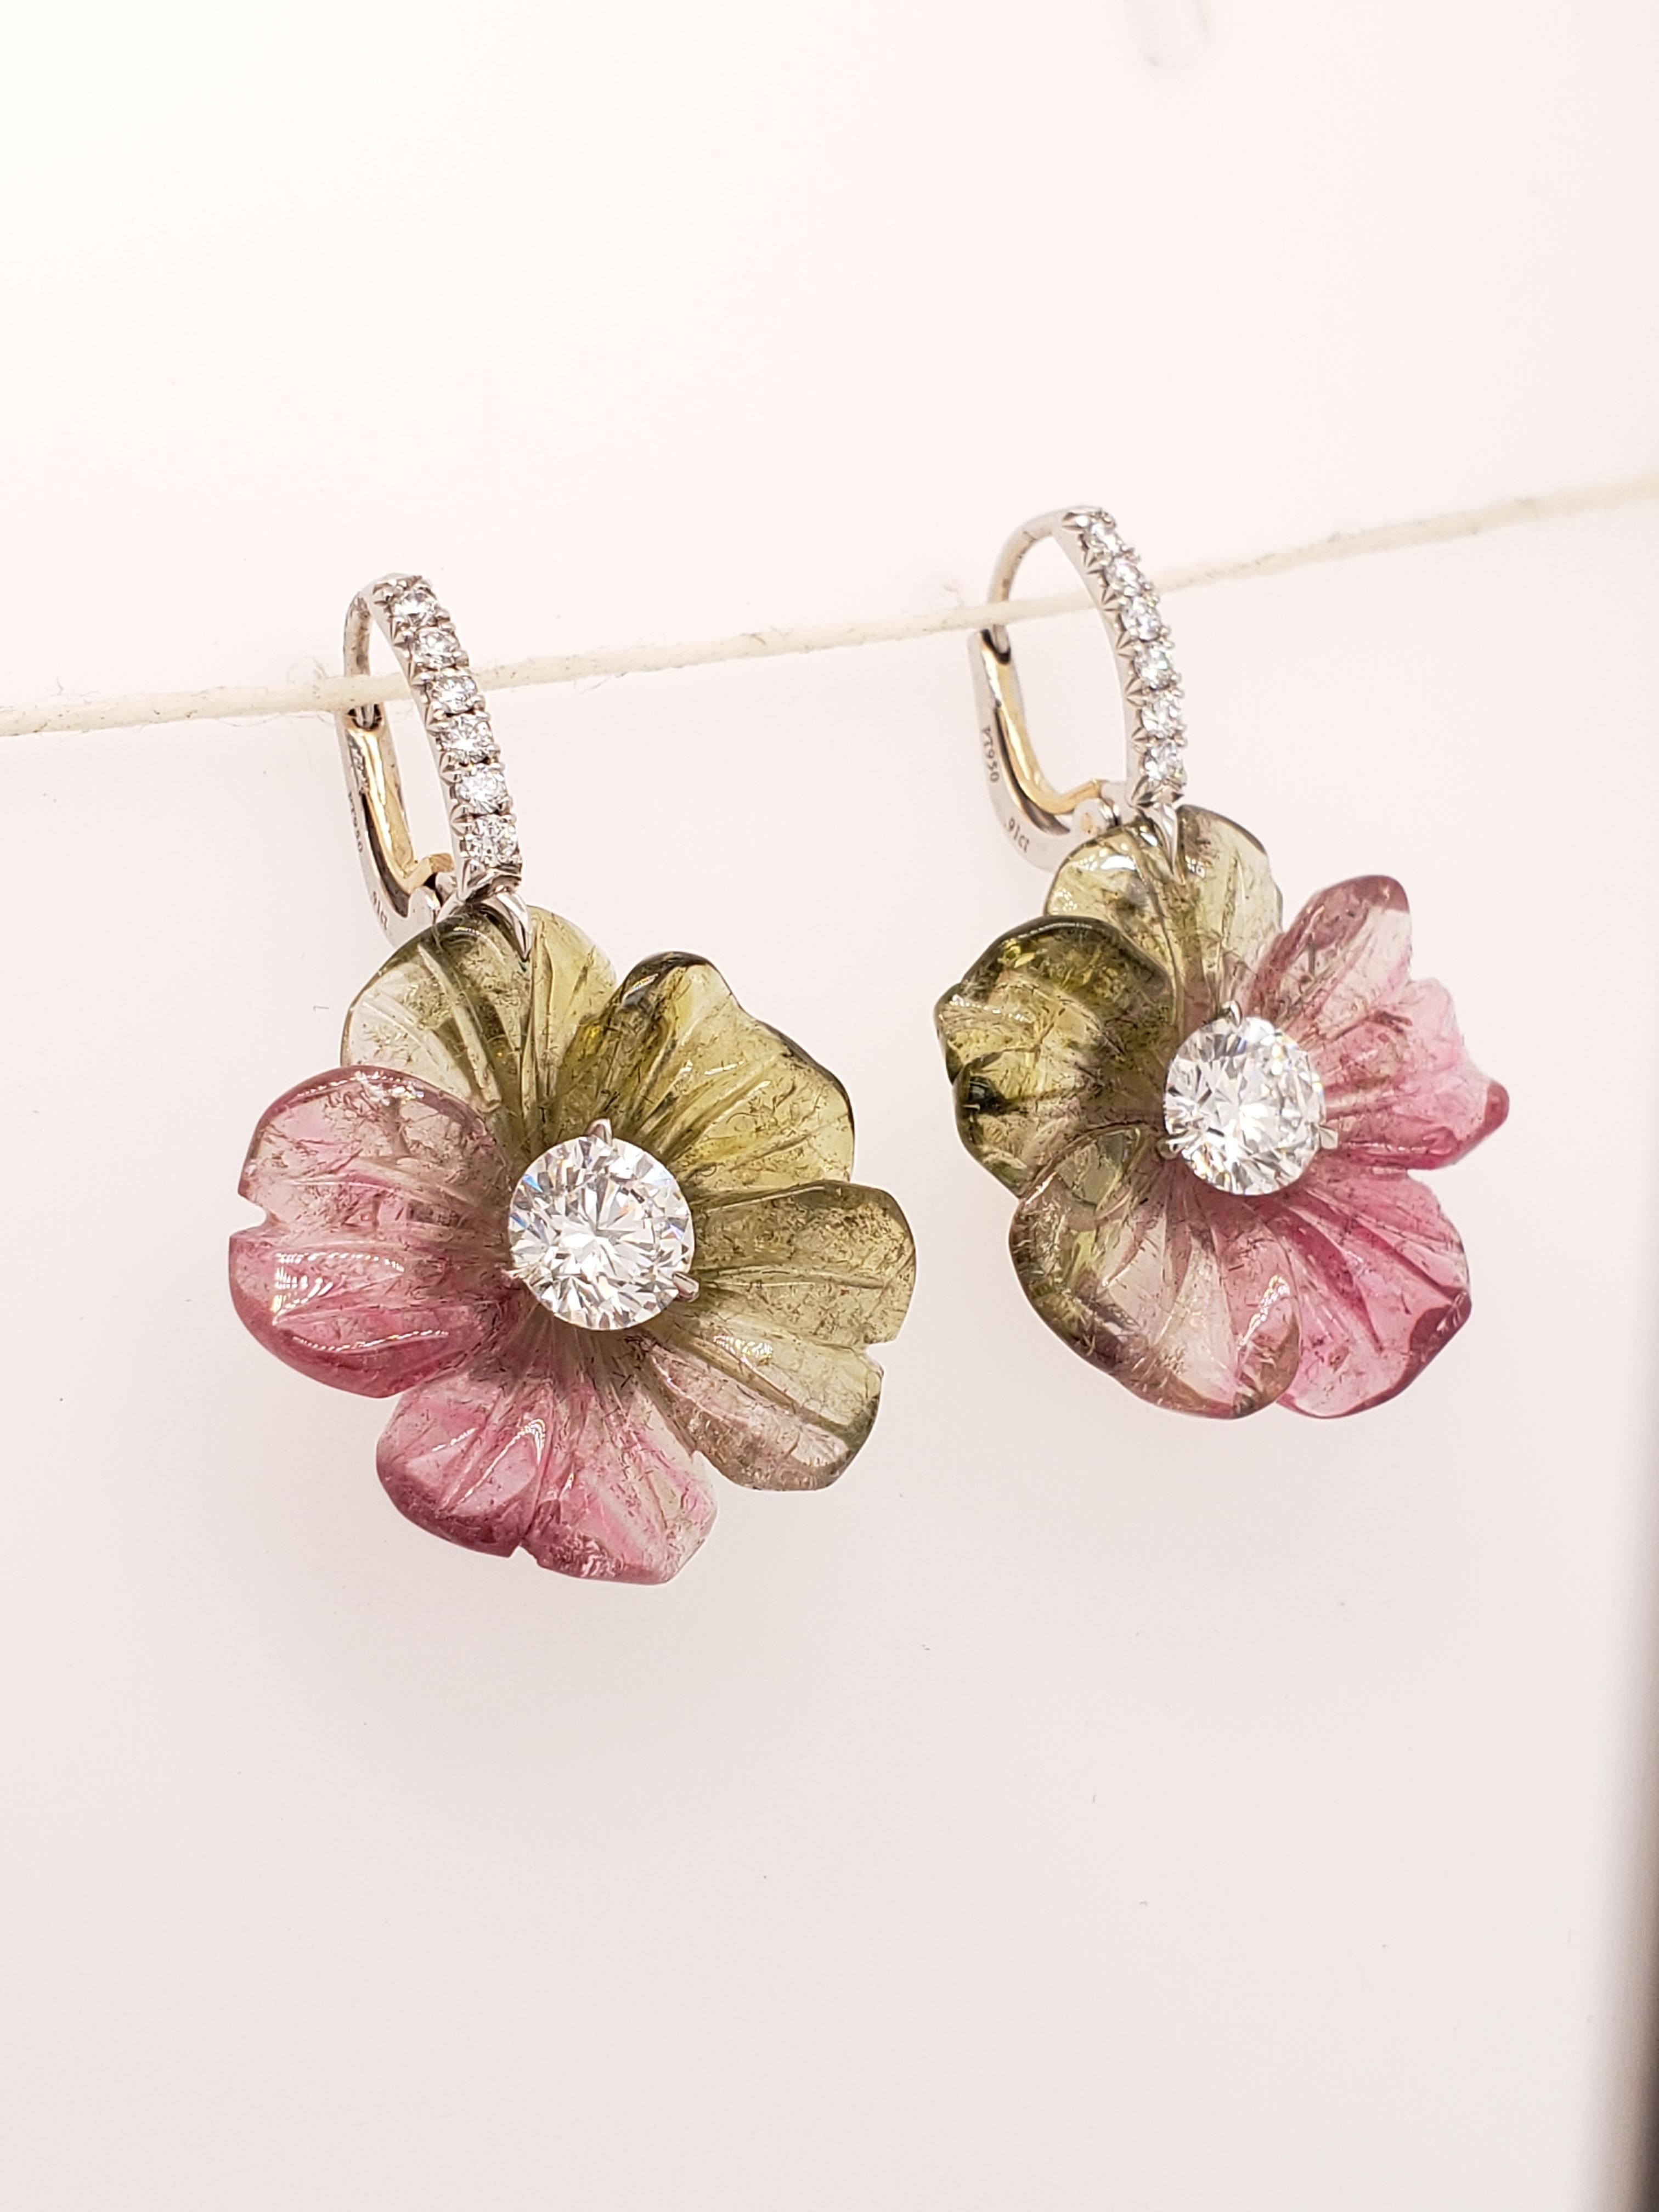 These unique earrings feature two expertly hand carved Watermelon Tourmaline flowers totaling 24.44 carats, mounted with two Round Brilliant cut F color, VS1 clarity diamonds weighing .91 carats each. The delicate earwire is set with collection